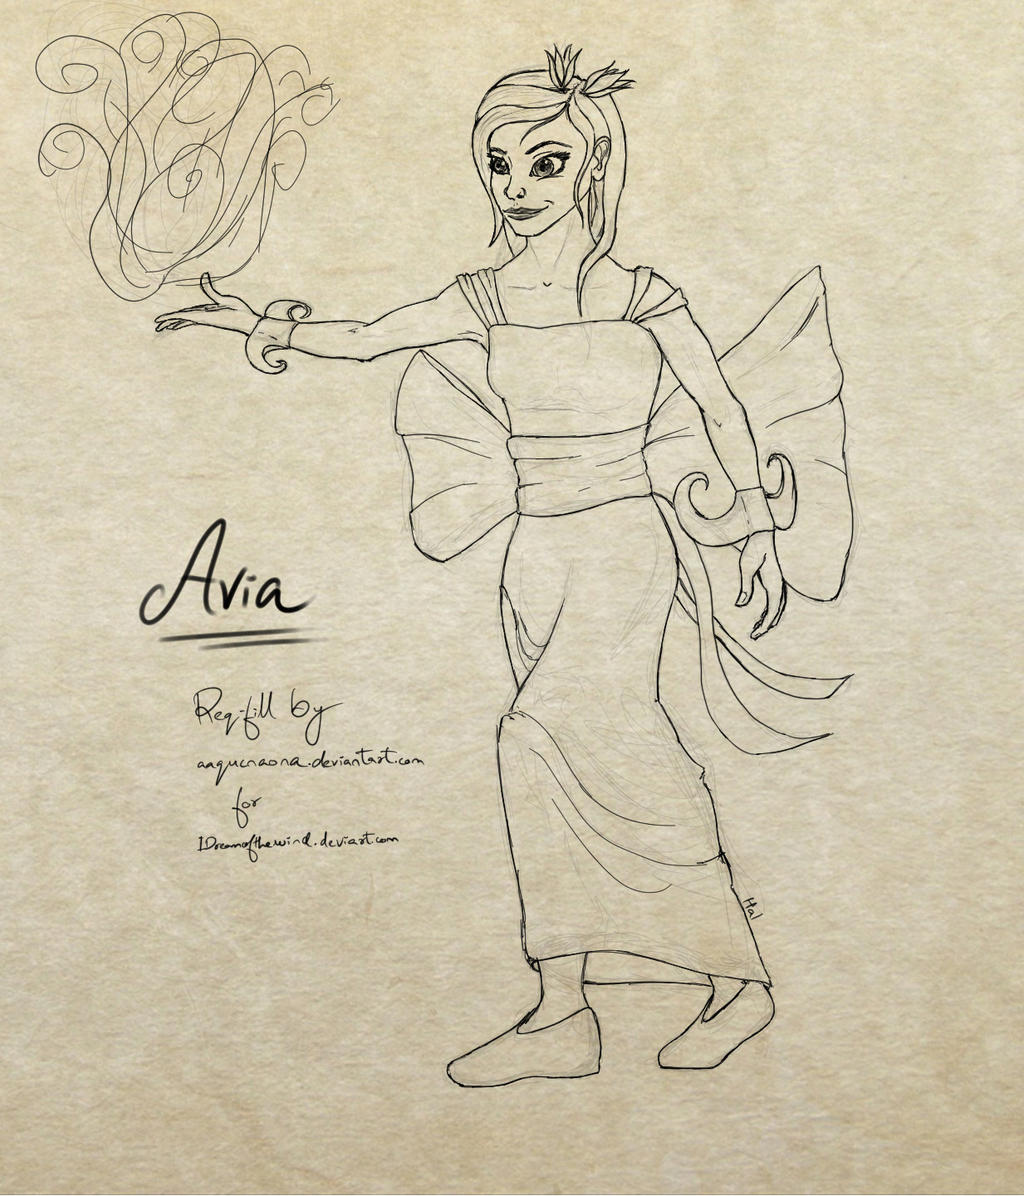 Avia - Request fill for Idreamofthewind